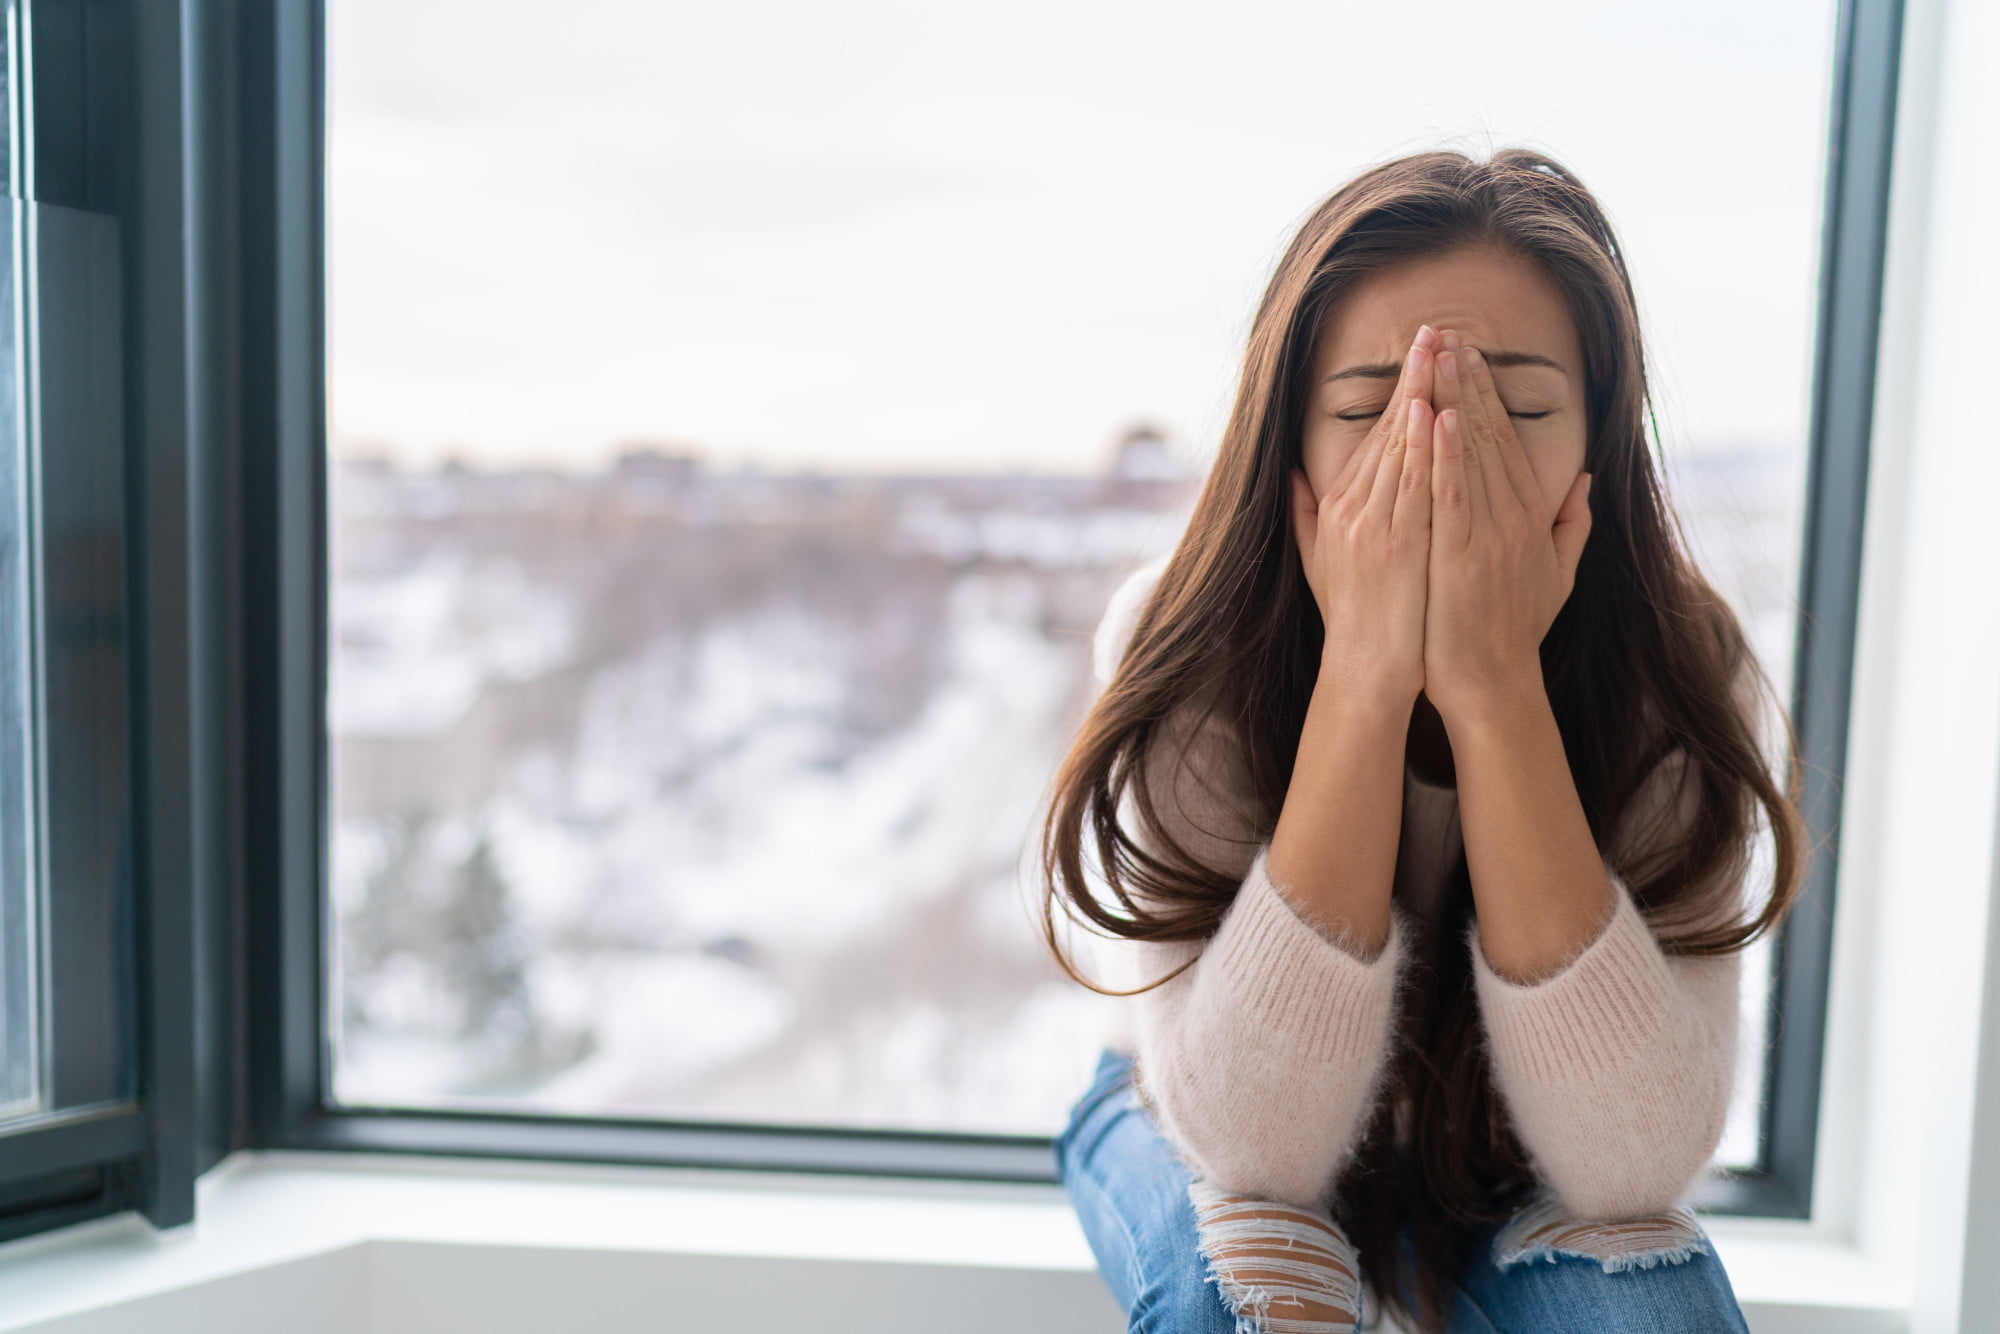 Coping with anxiety and depression can feel suffocating. Our experts are here to help with these strategies on how to manage anxiety and depression.